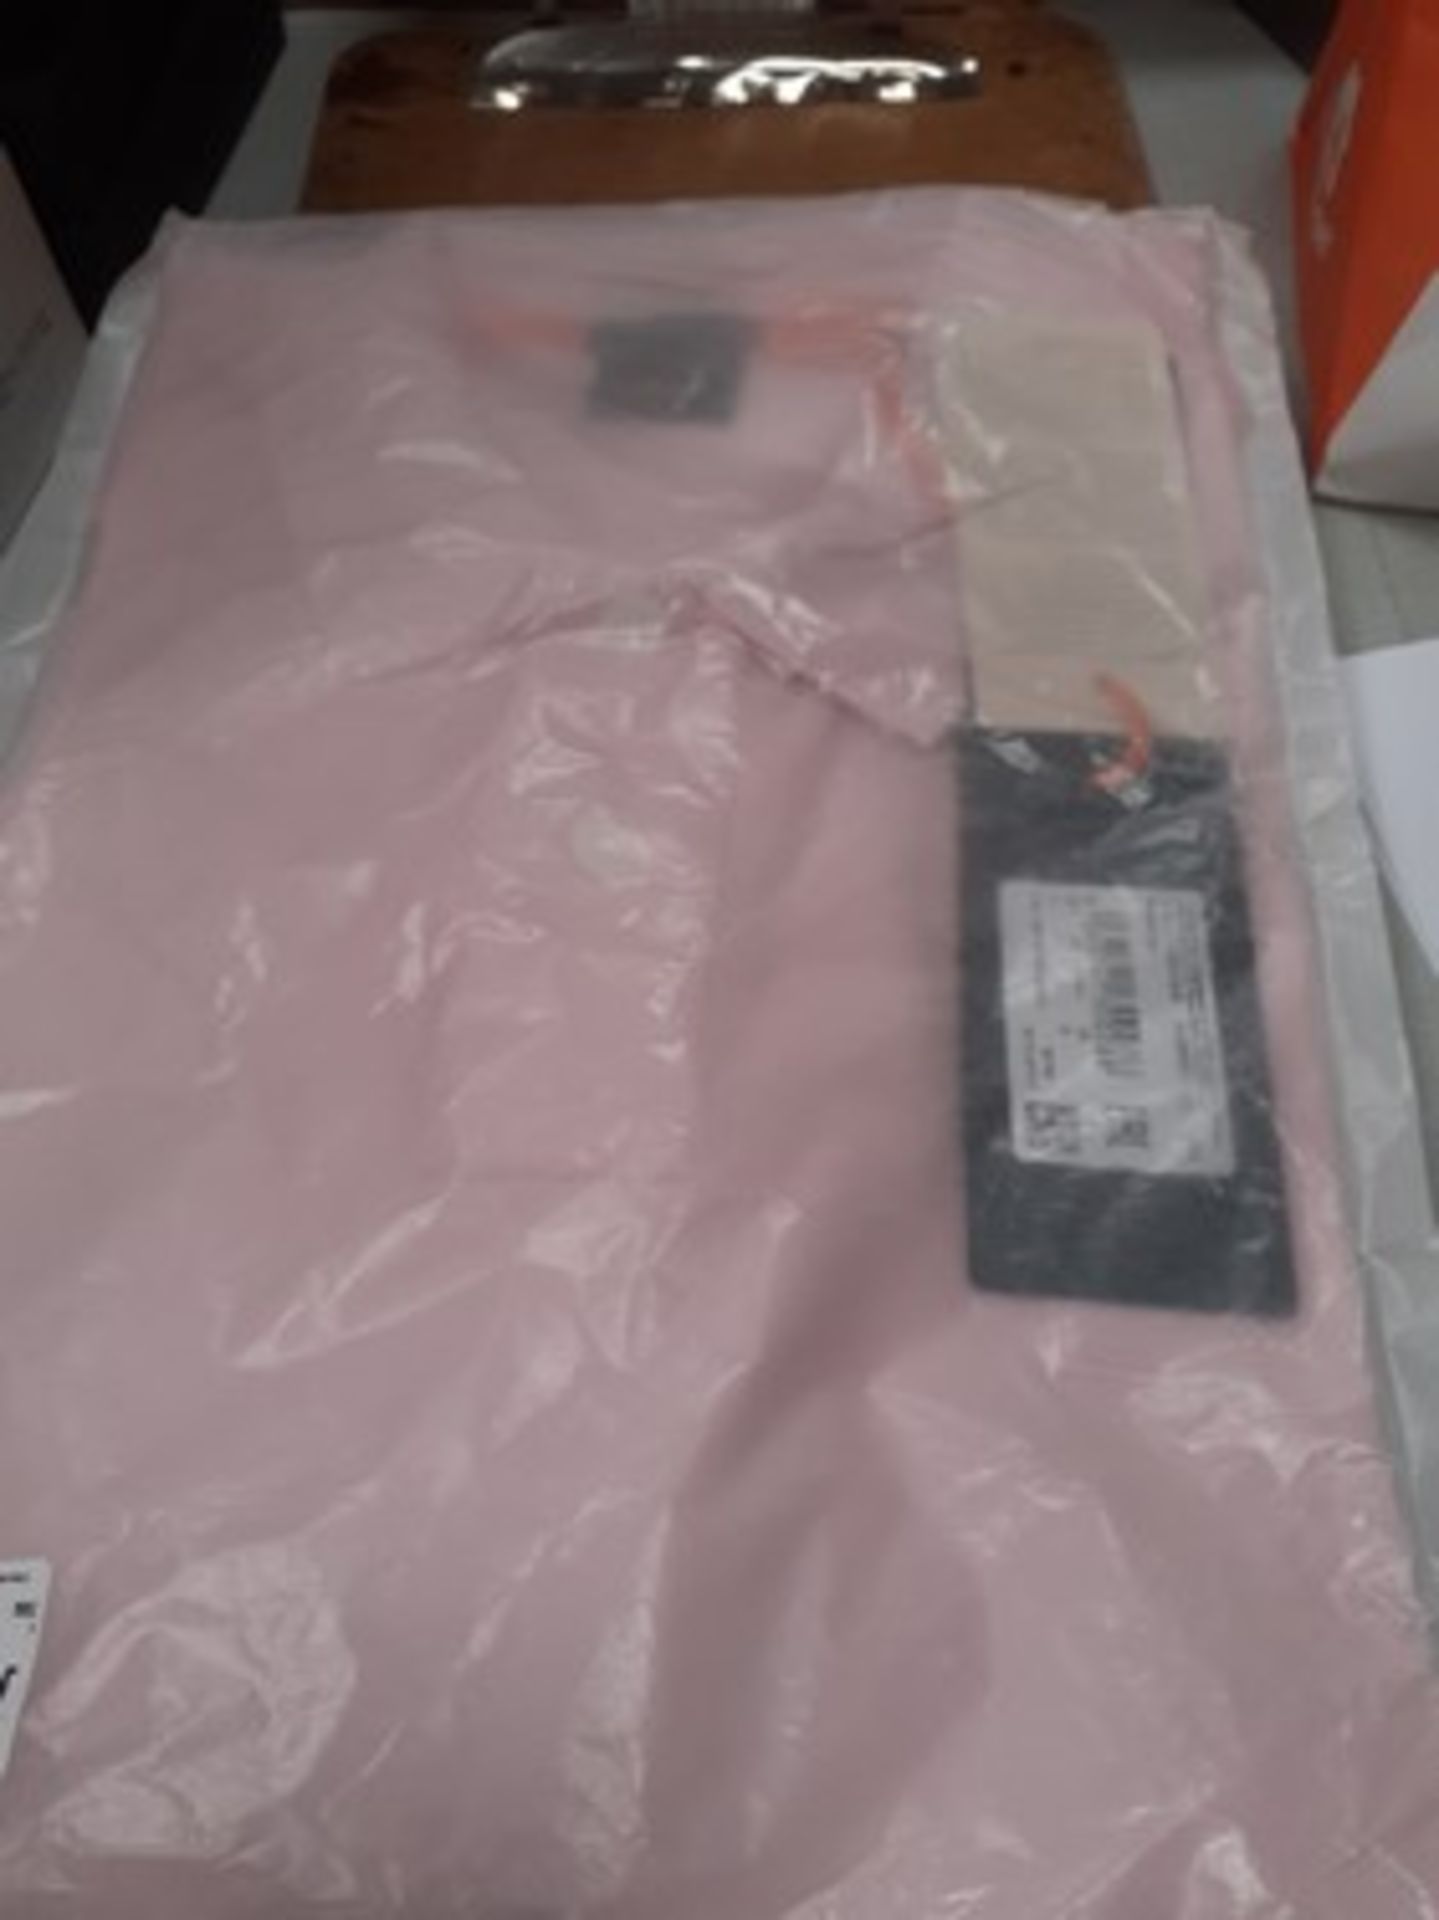 2 x Hugo Boss pink Passenger polo shirts, size L - sealed new in pack (E8B)